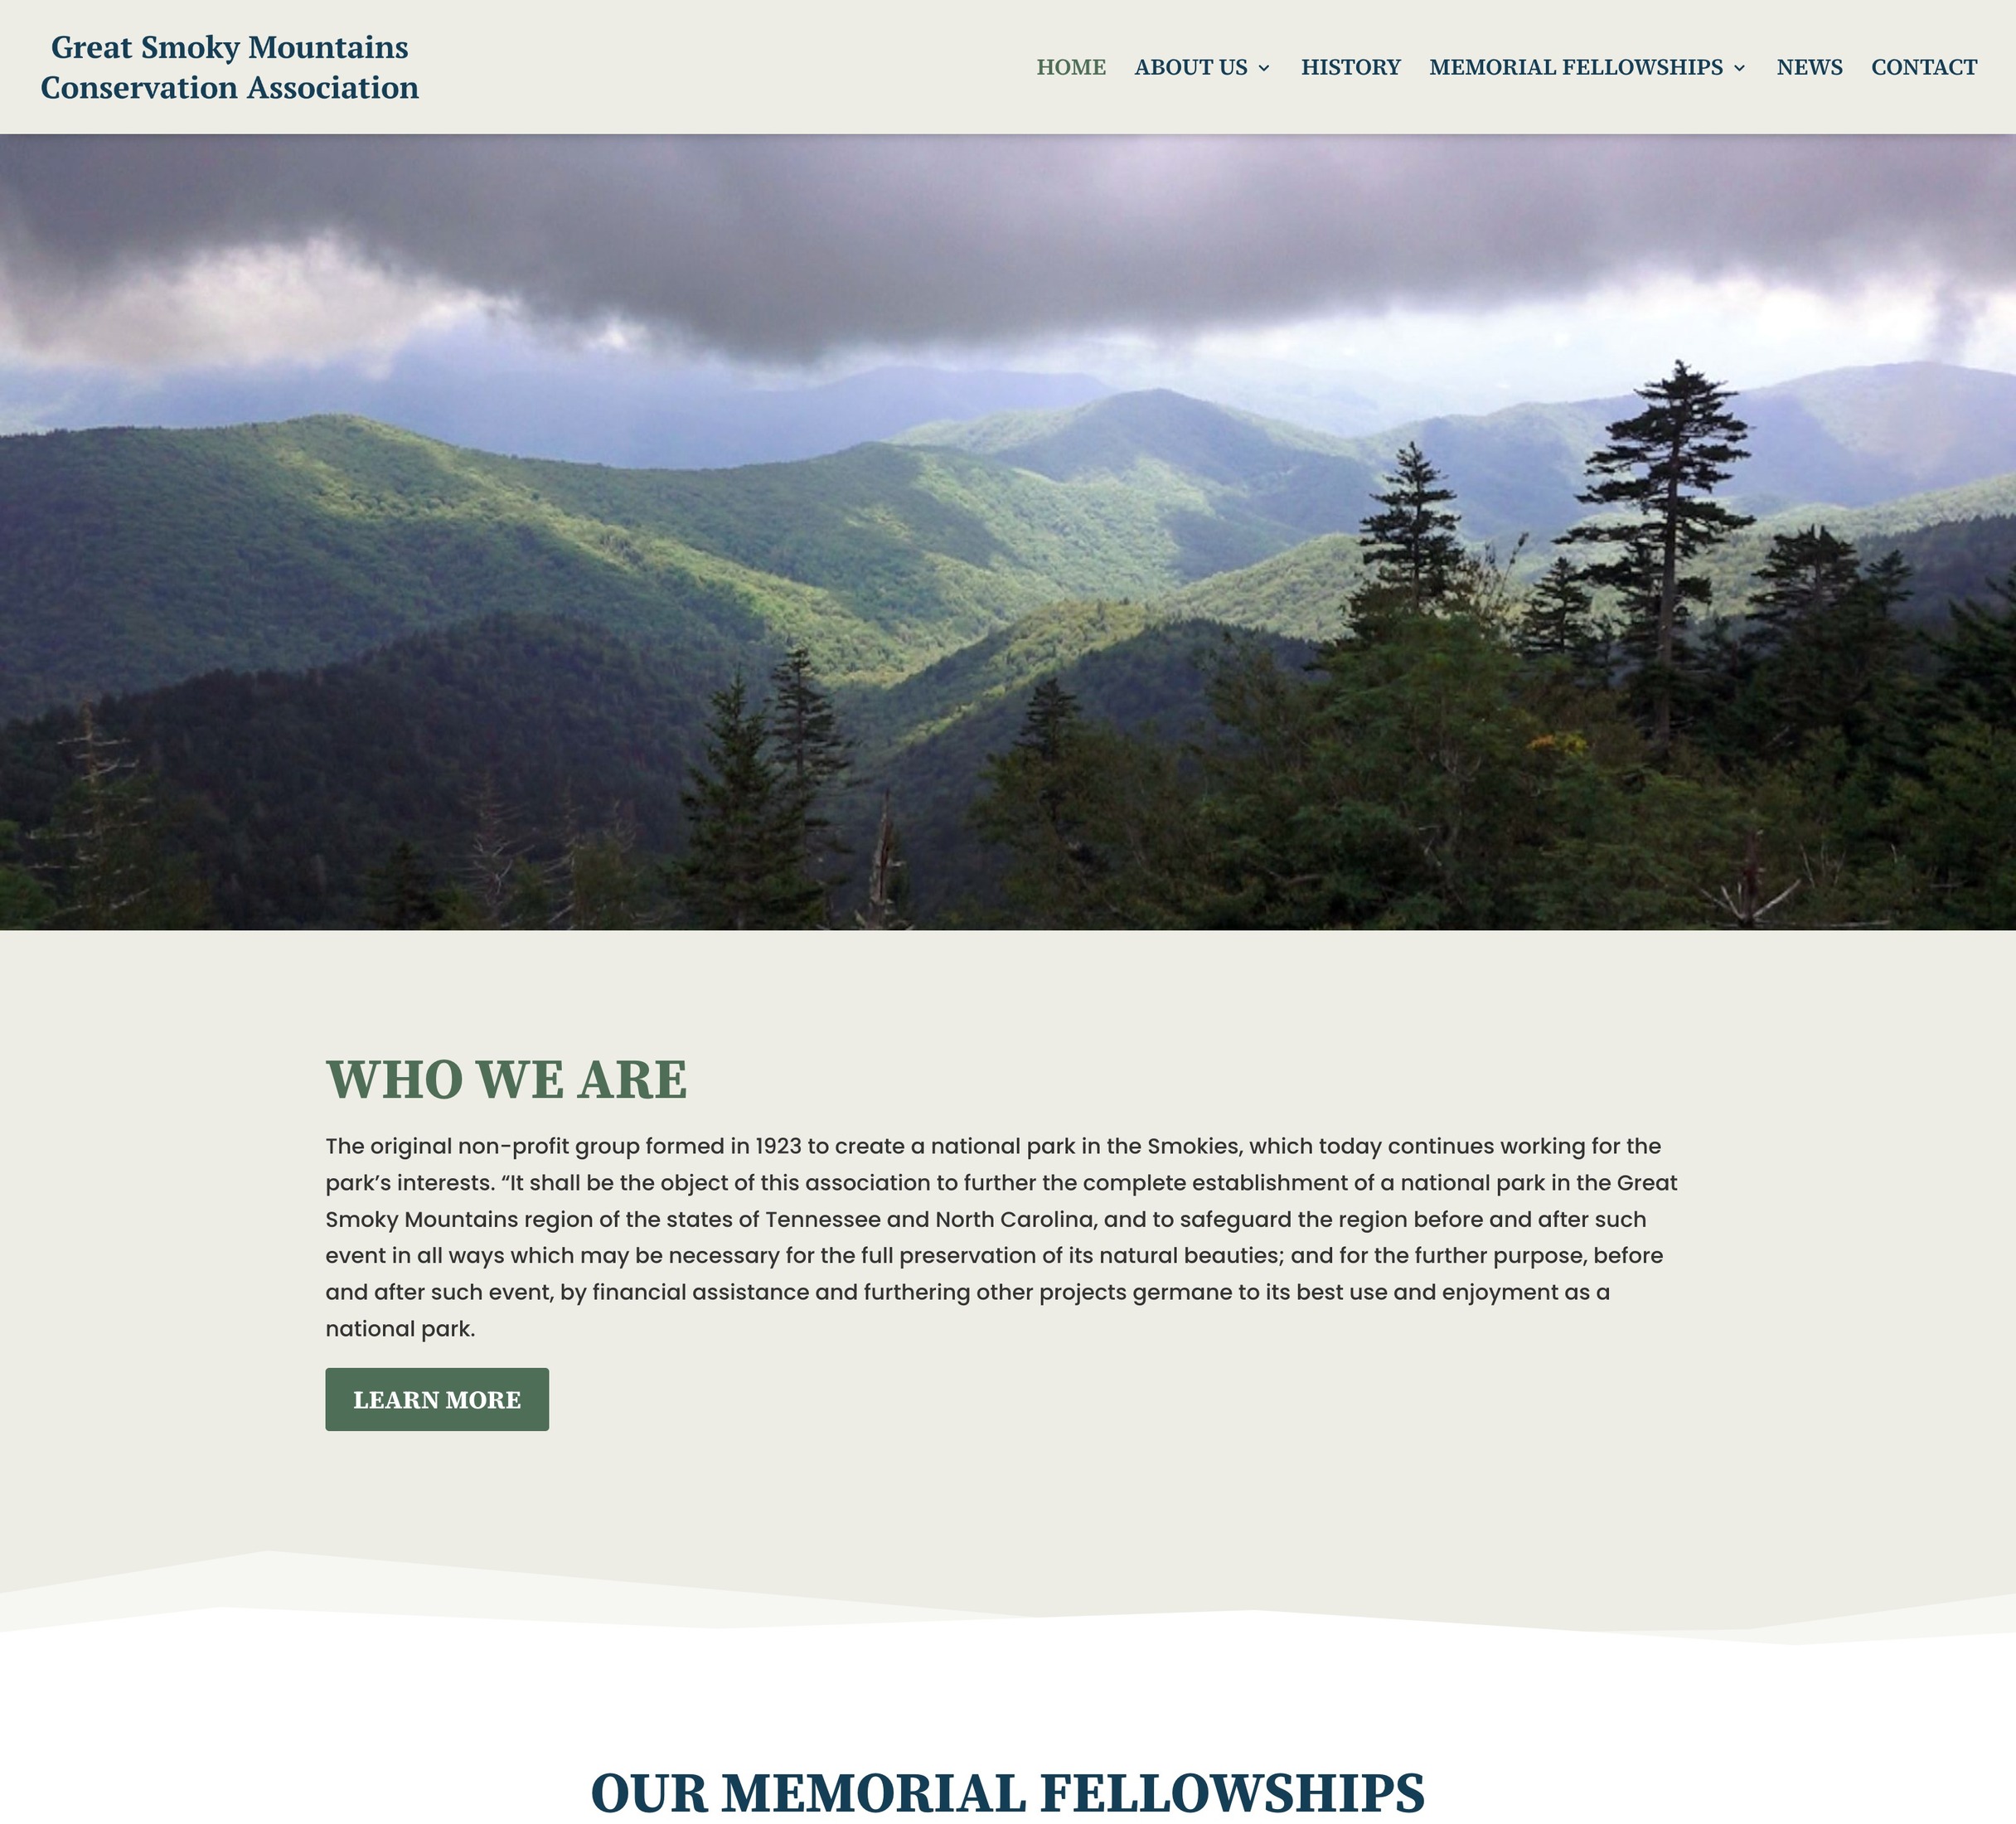 Great Smoky Mountains Conservation Association